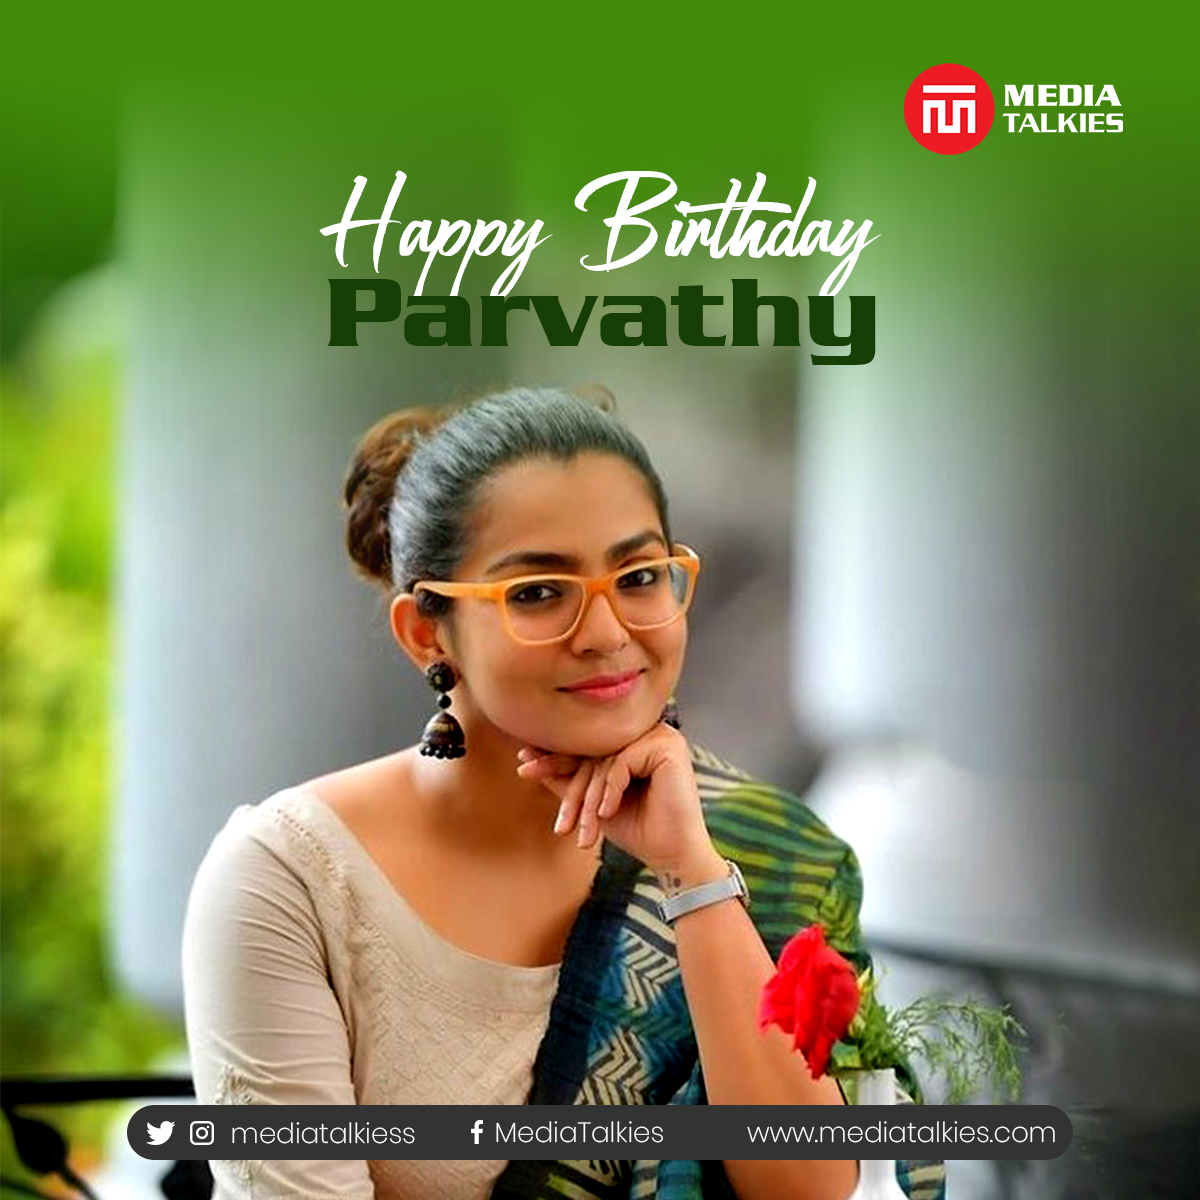 Birthday wishes to the gorgeous @parvatweets ❤

#ParvathyThiruvothu #HBDParvathyThiruvothu #HappyBirthdayParvathy #WishesFromMediaTalkies #Parvathy